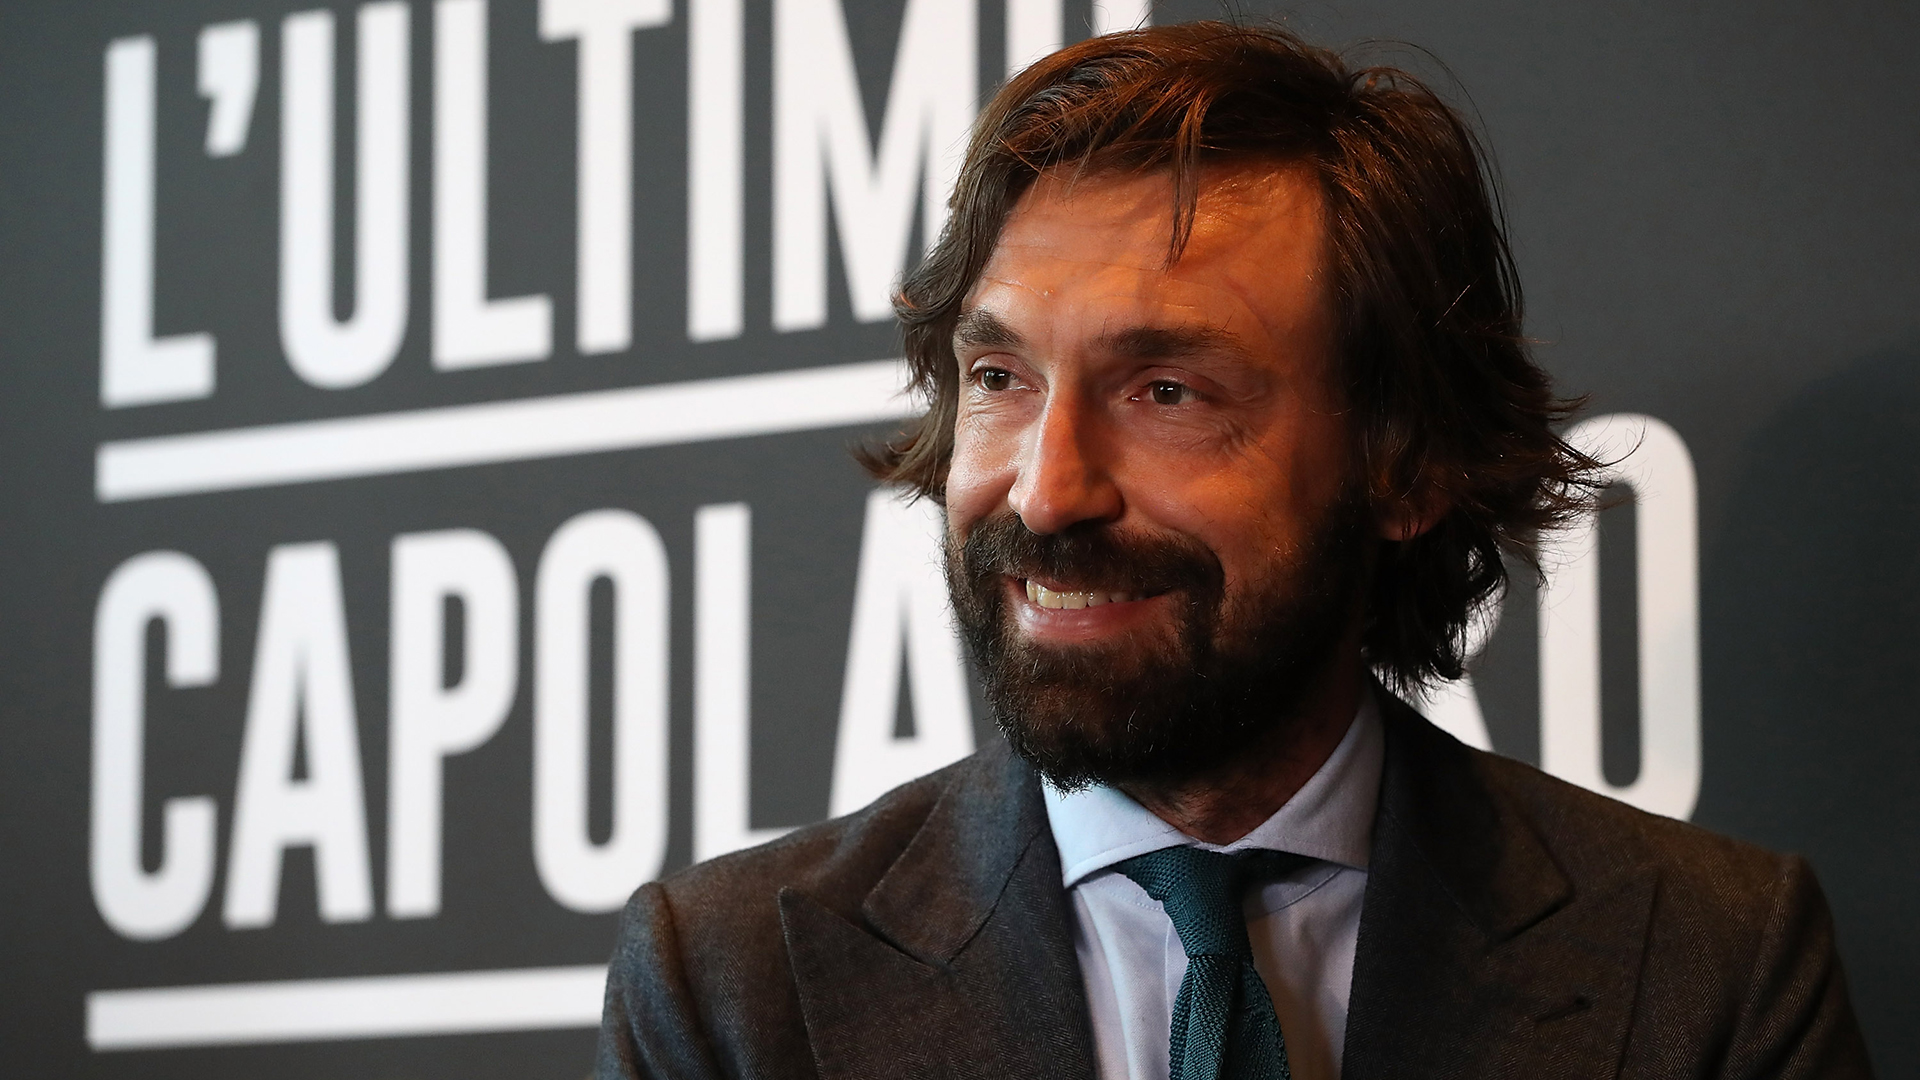 Pirlo was laughing like crazy when he got the Juventus job, says Galliani